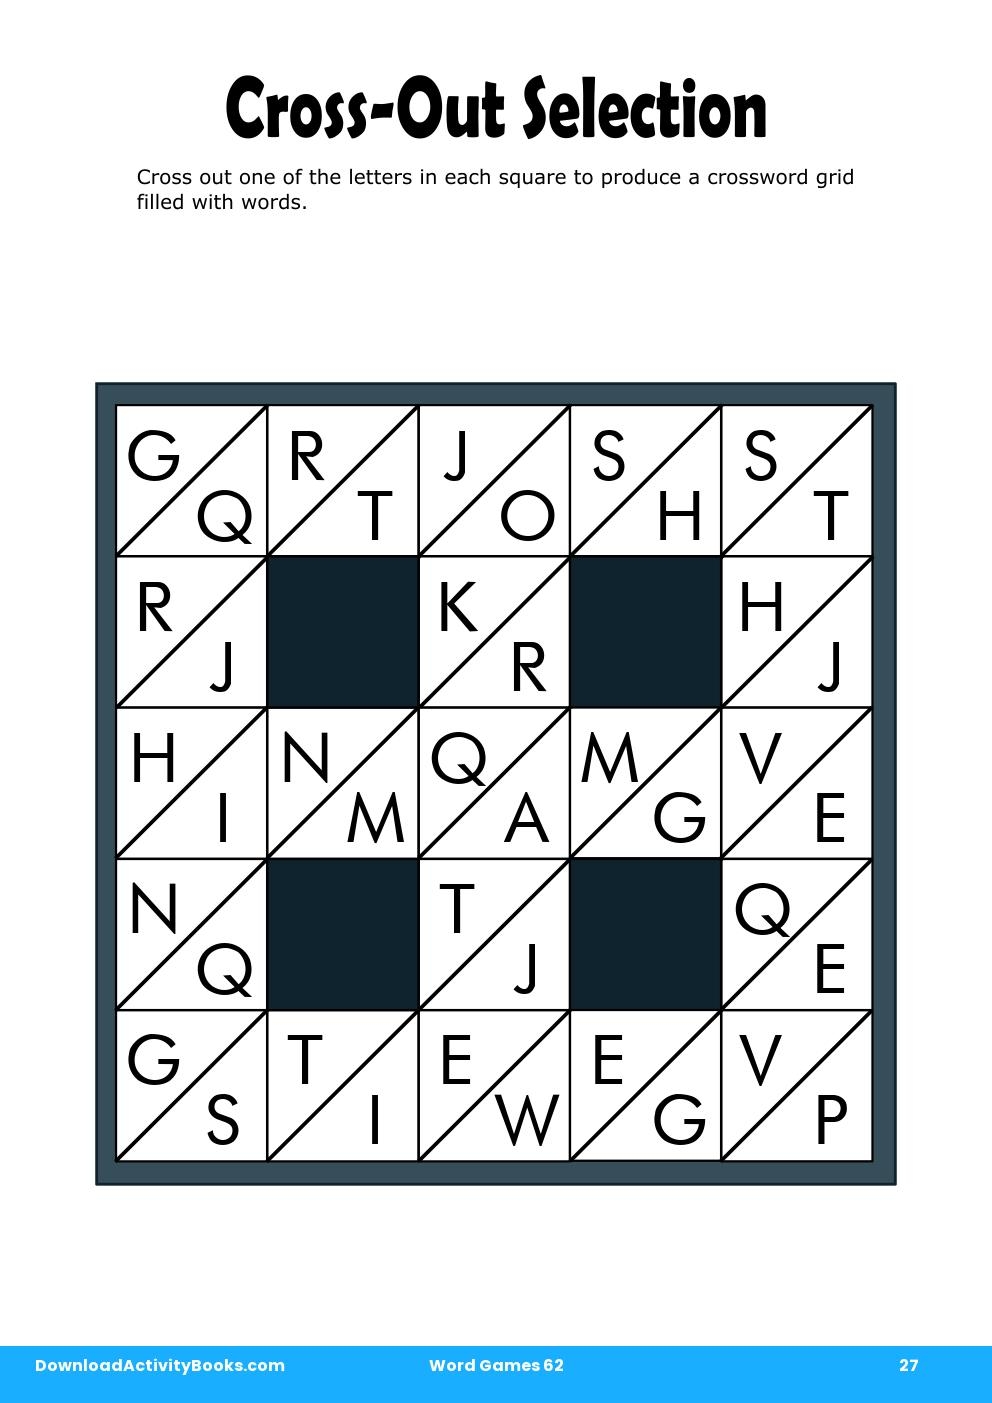 Cross-Out Selection in Word Games 62